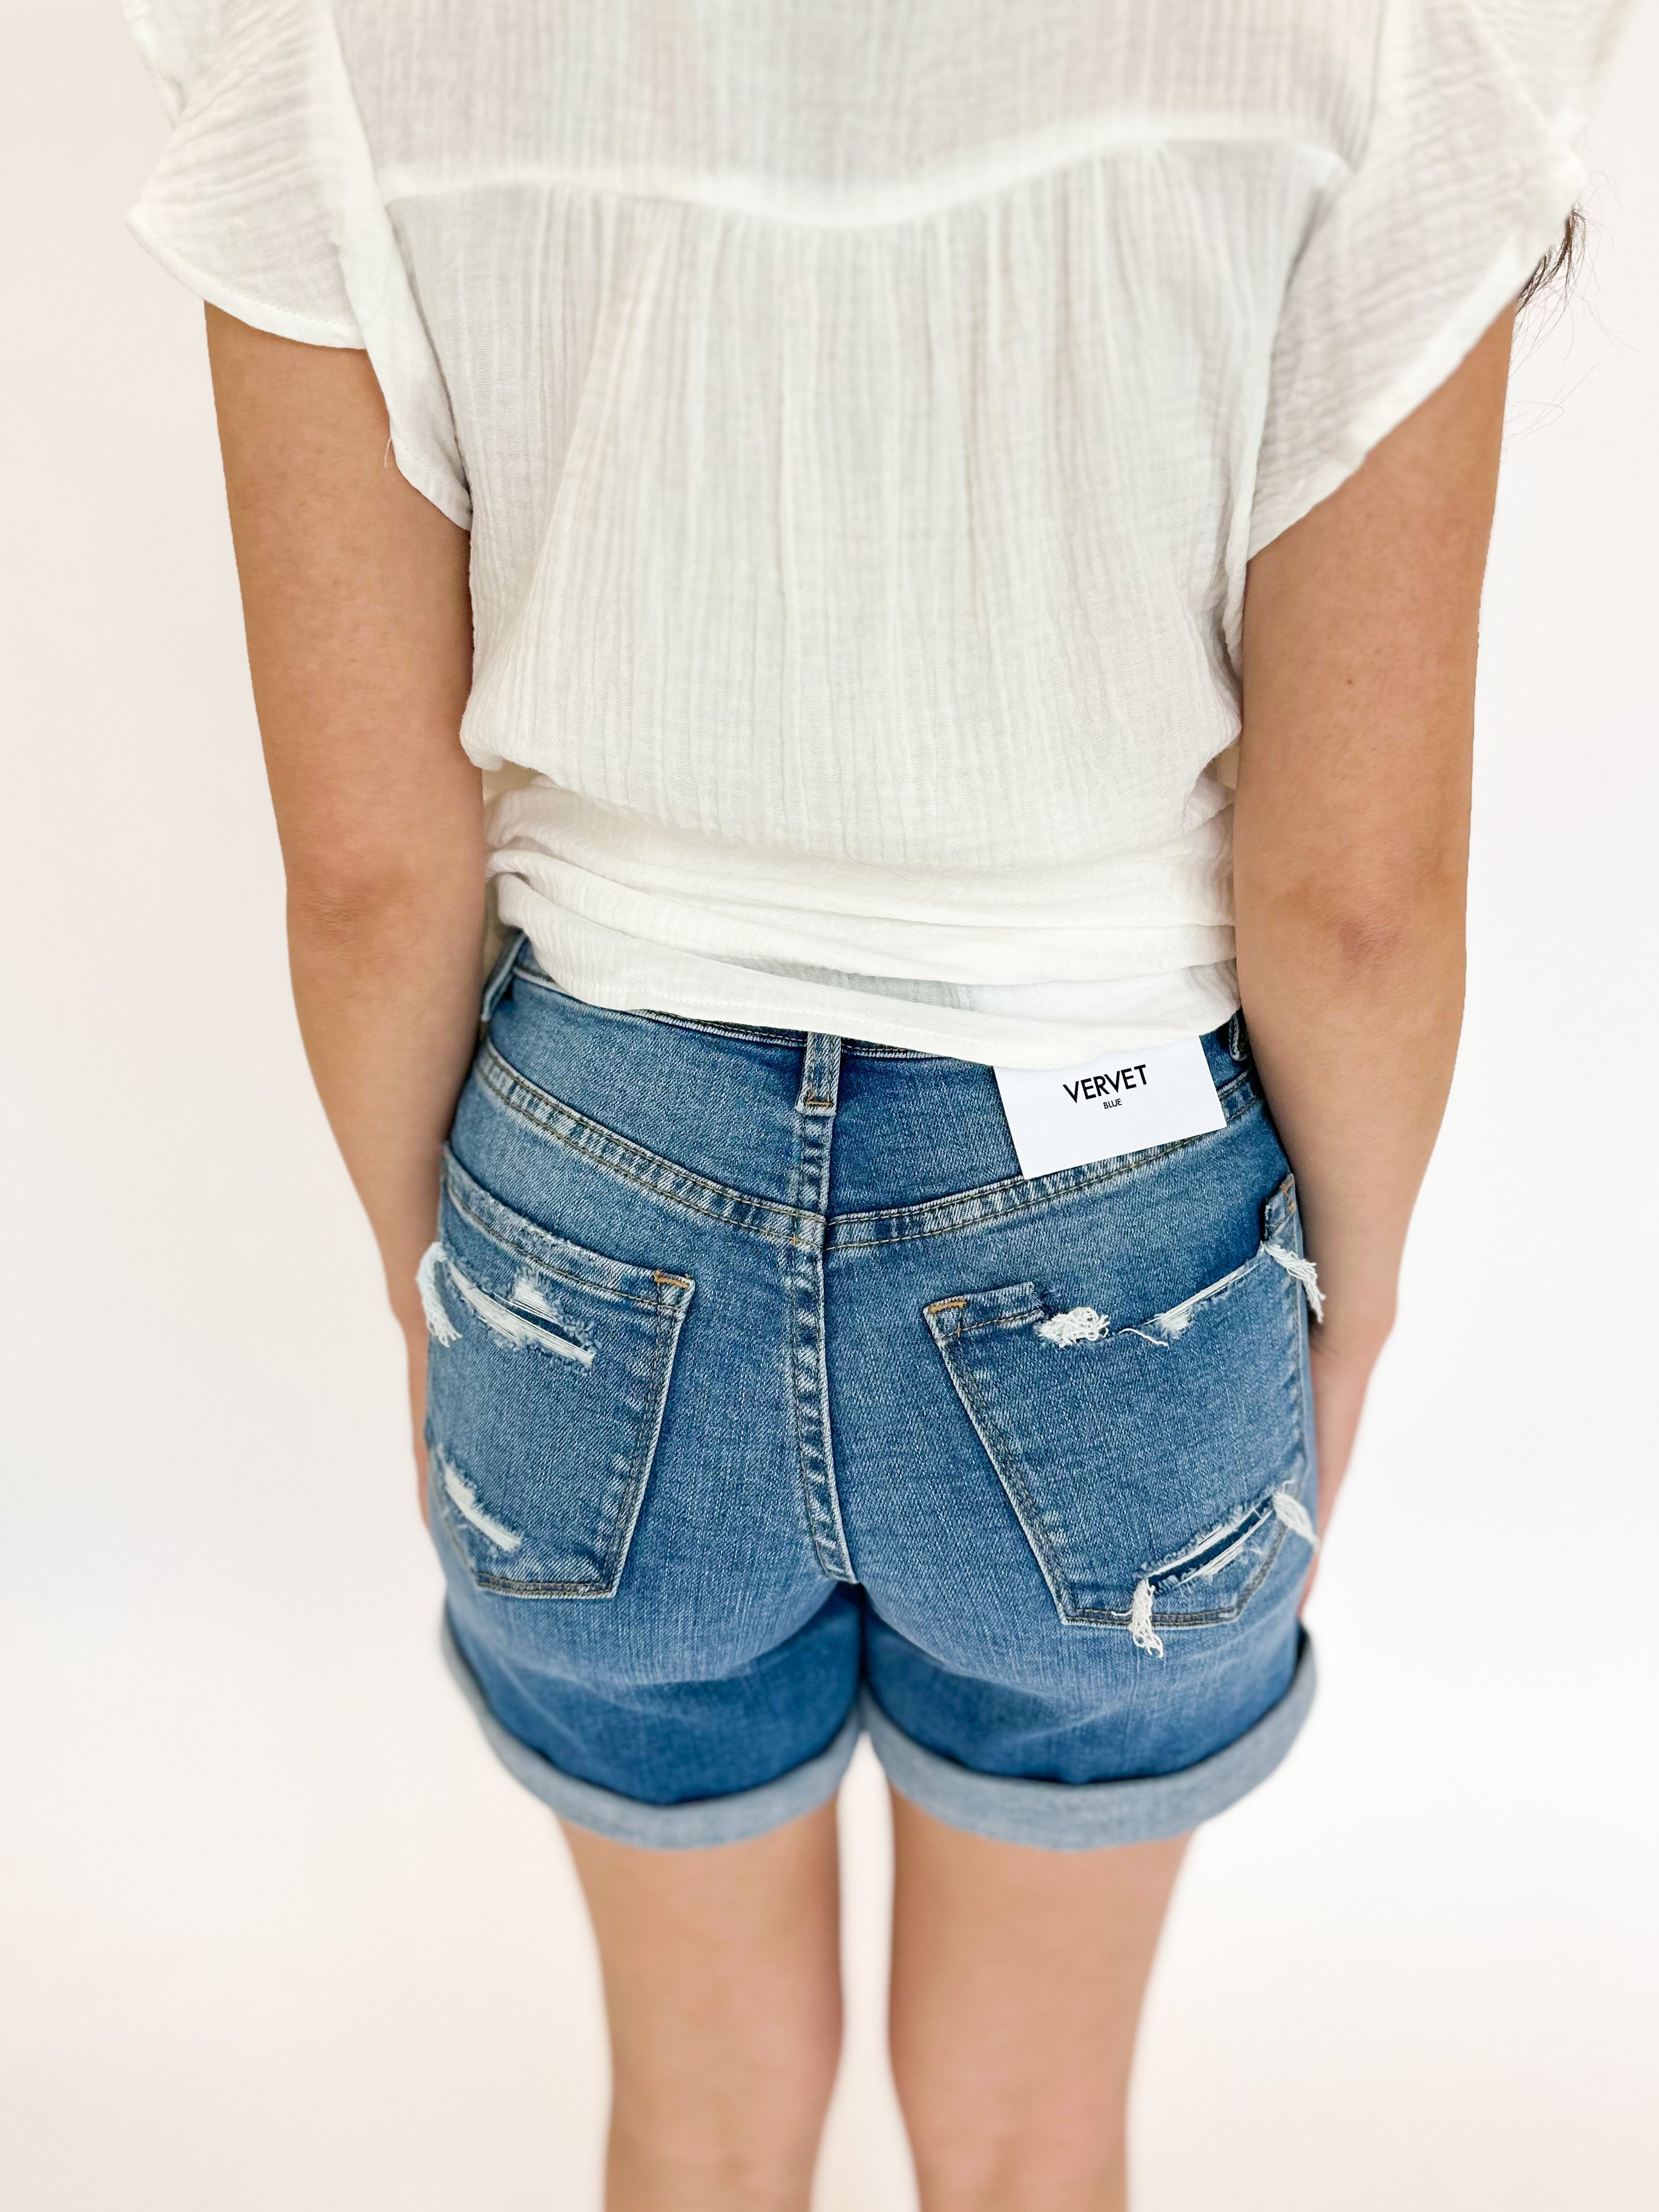 Vervet High Rise Distressed Denim Shorts-410 Shorts/Skirts-VEVERT BY FLYING MONKEY-July & June Women's Boutique, Located in San Antonio, Texas